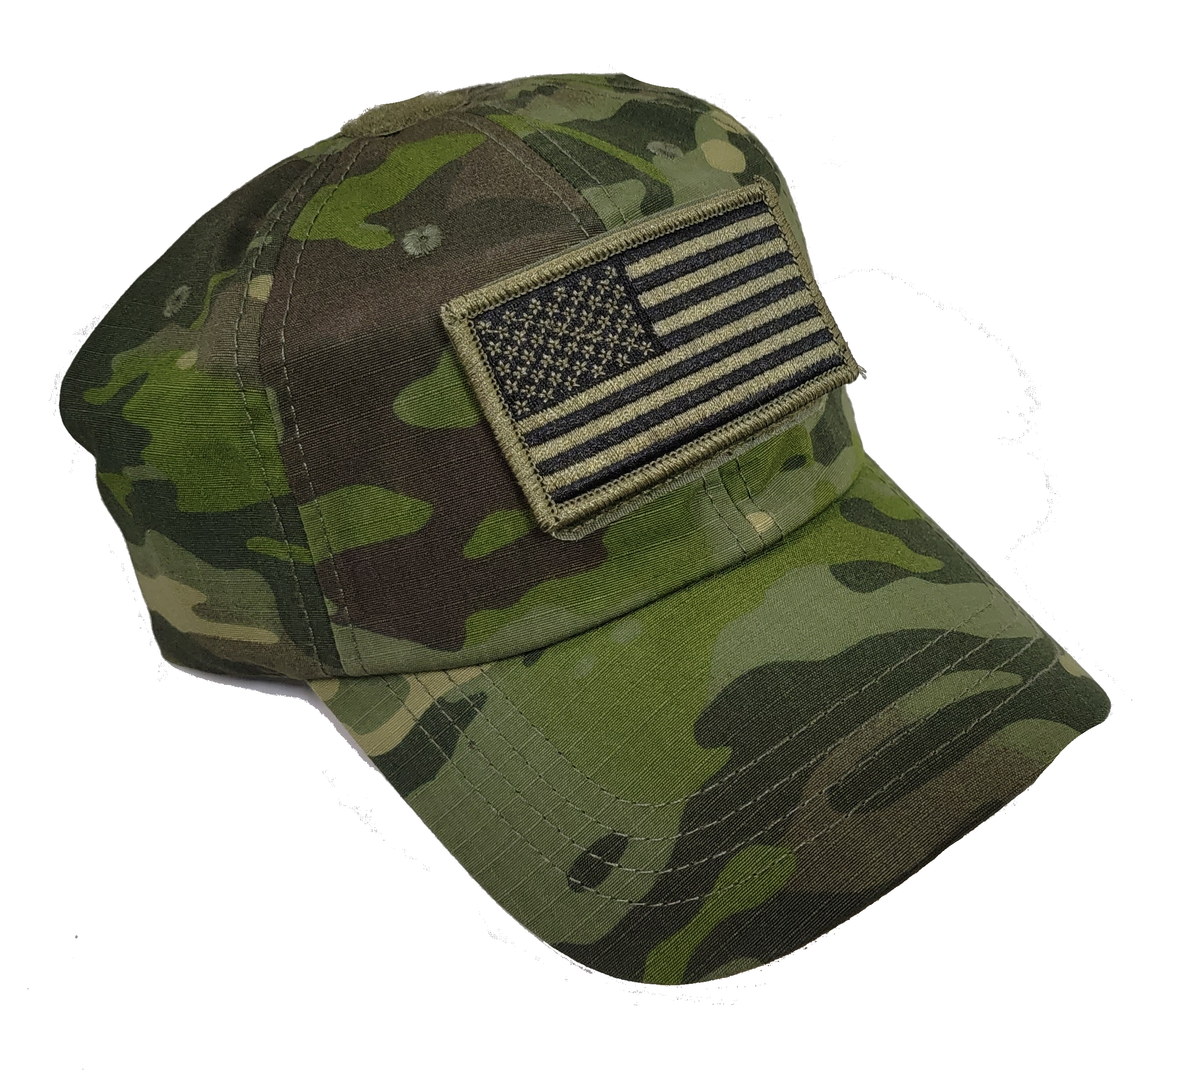 Tactical Cap Package with U.S. Flag Patch and Personalized Name Tape - Various Colors